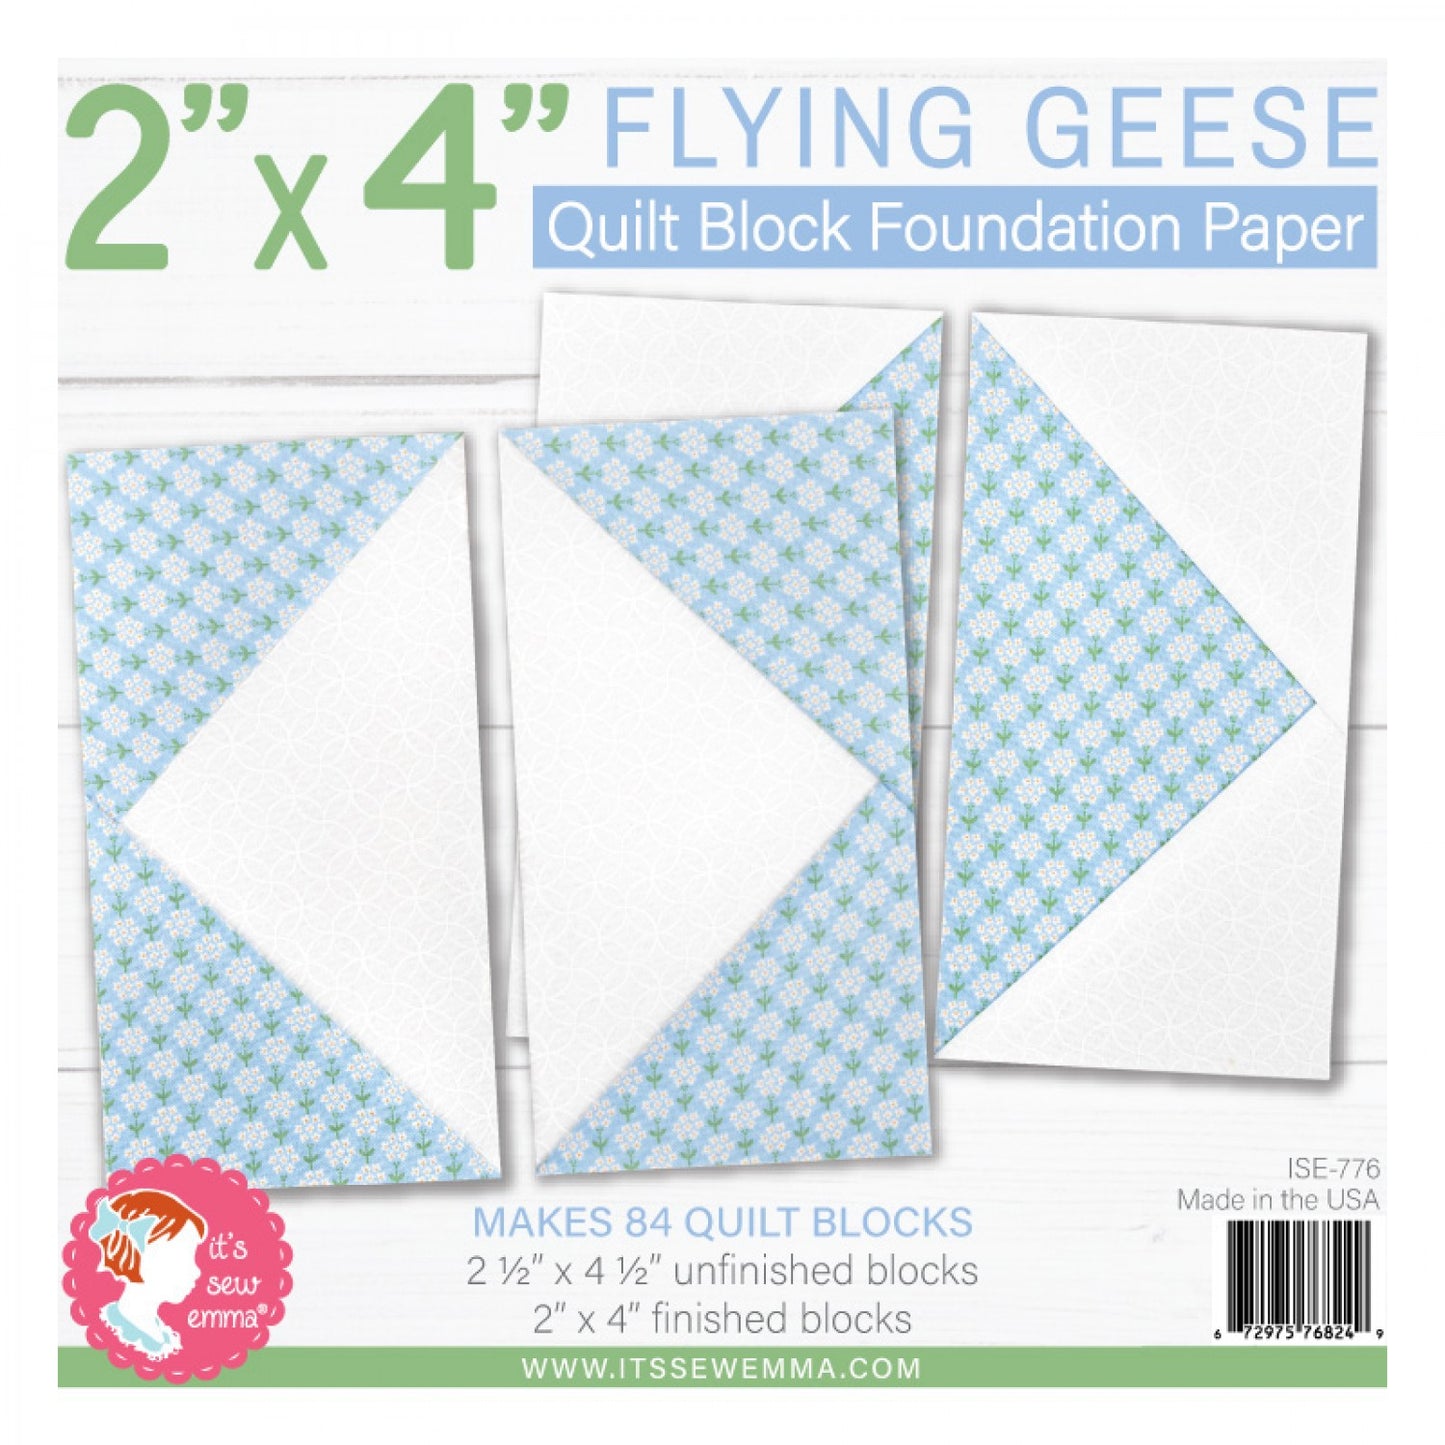 2" x 4" Flying Geese Foundation Paper | It's Sew Emma